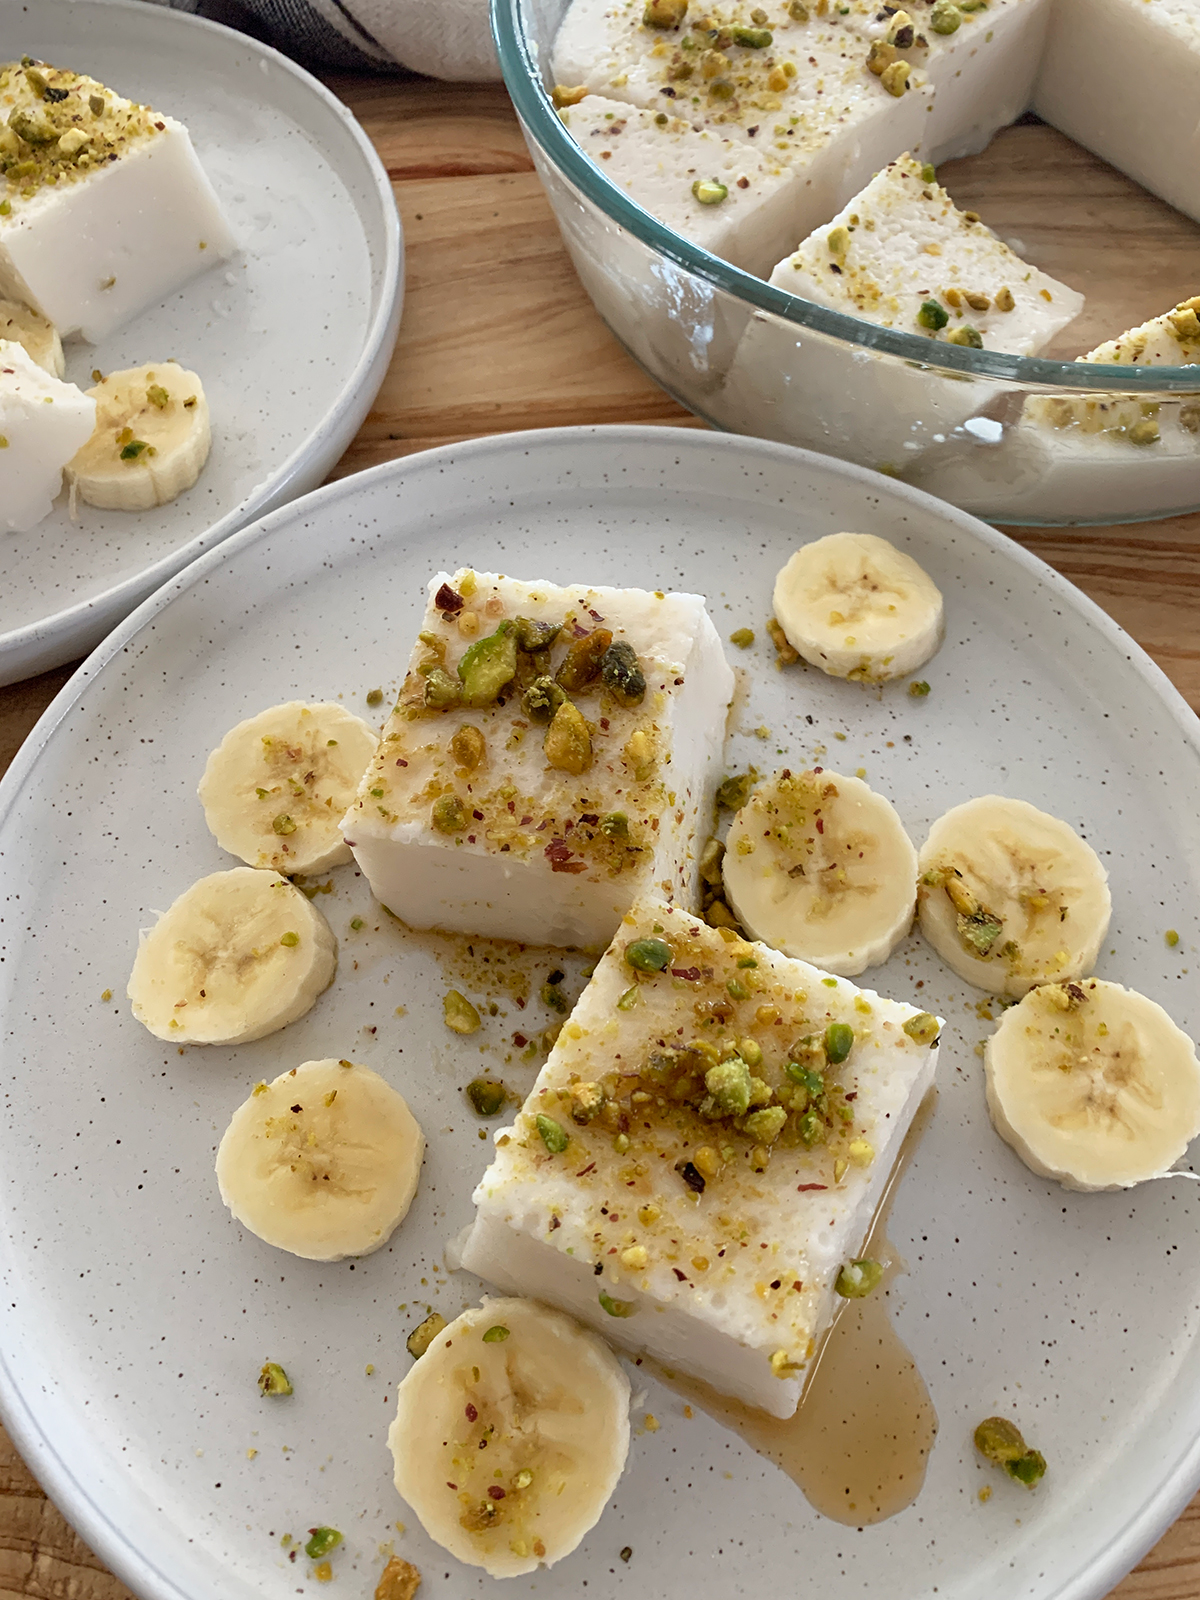 Haytaliyeh served in cubes on a white plate with banana and the original tray in the backgroud